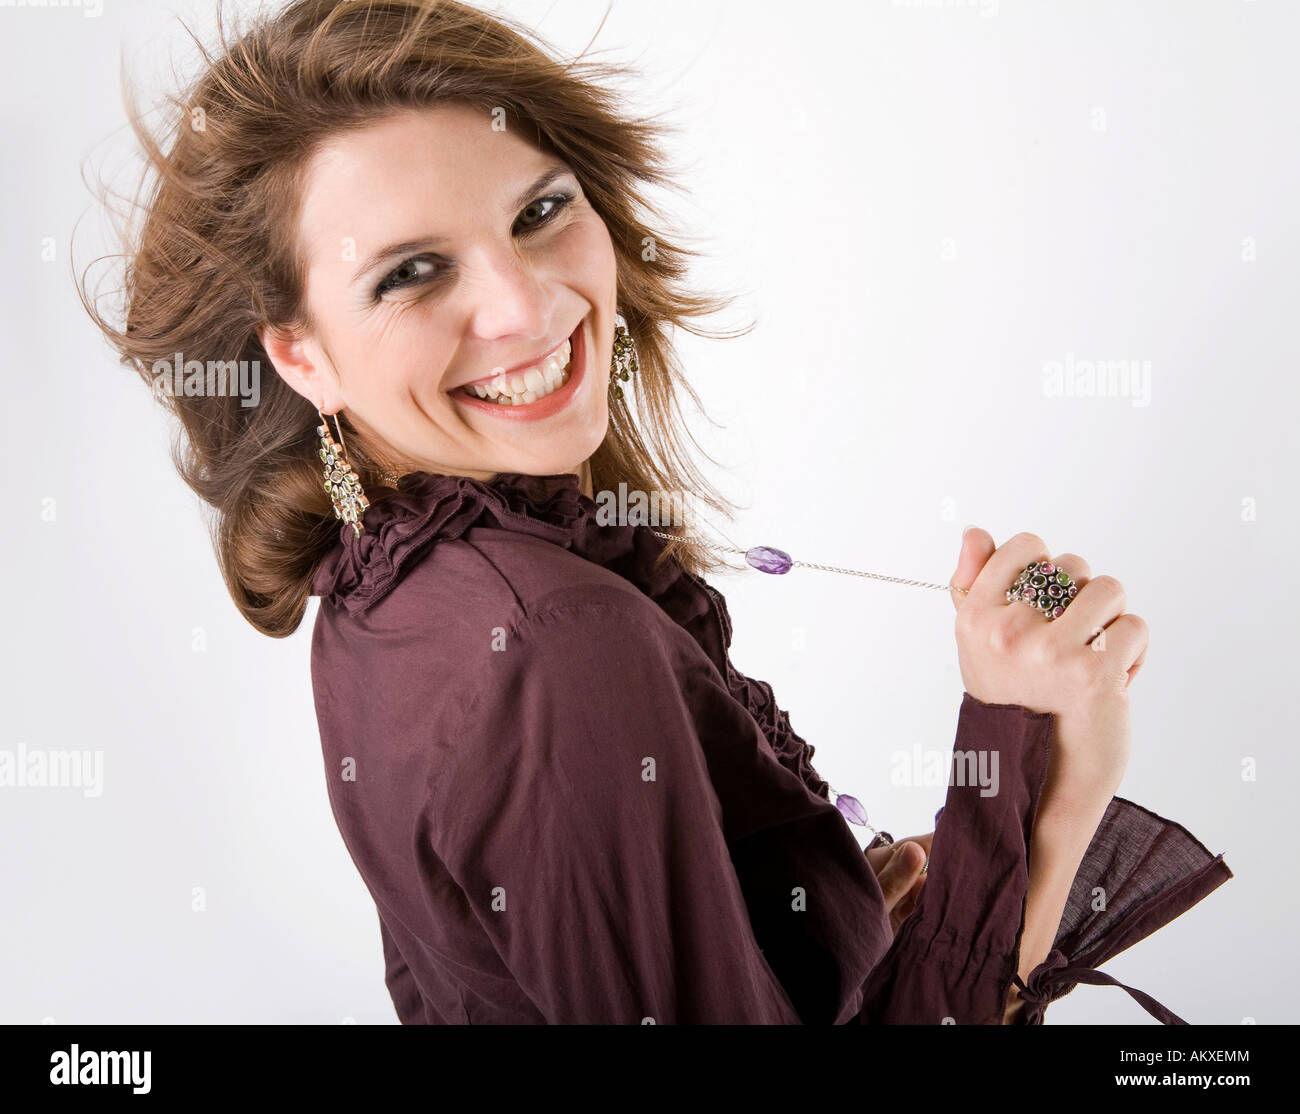 Portrait of a feminine young woman Stock Photo